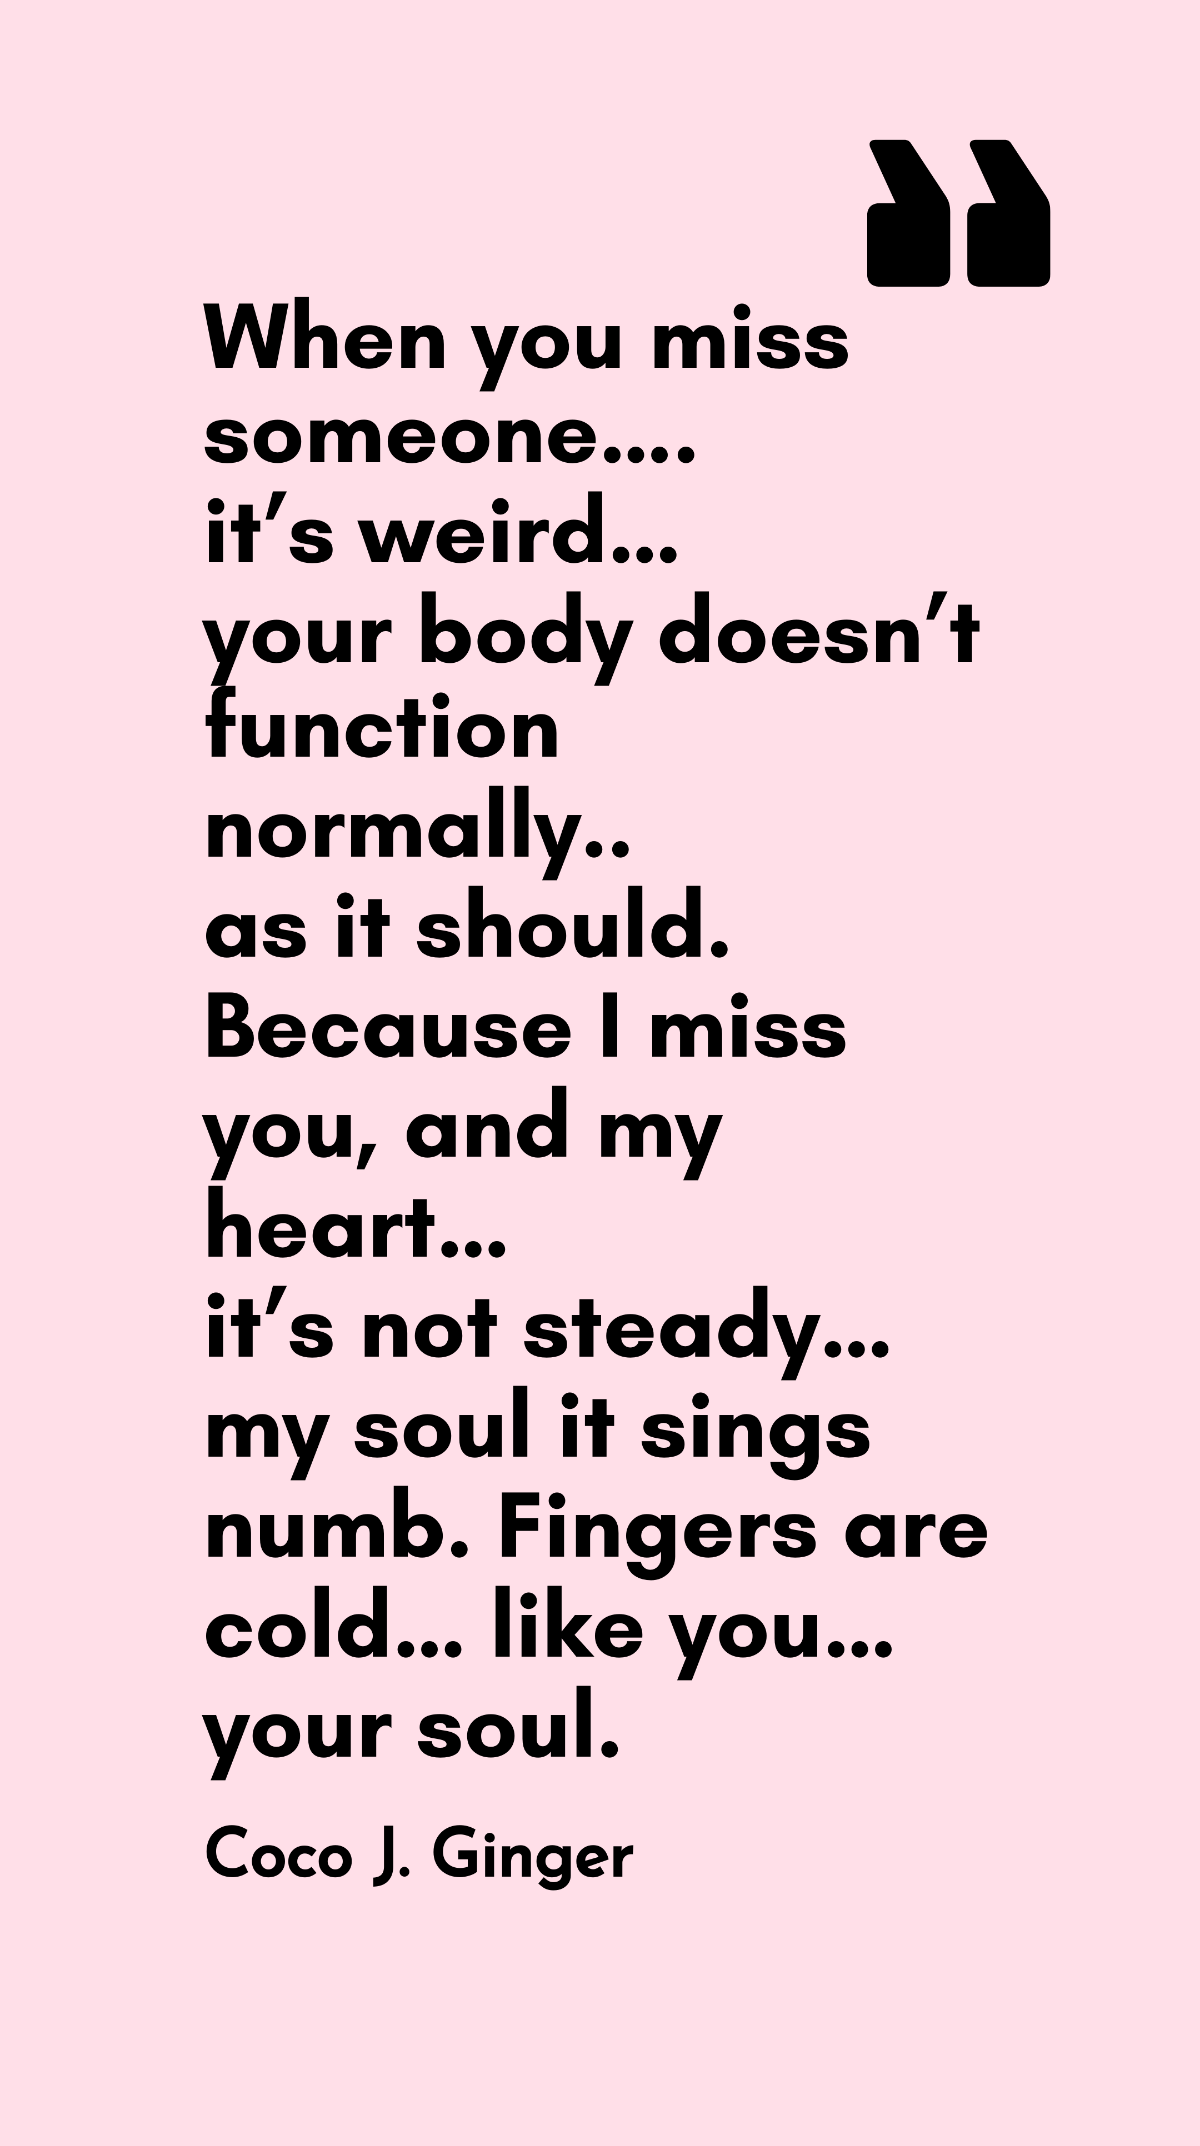 Coco J. Ginger - When you miss someone….it’s weird…your body doesn’t function normally..as it should. Because I miss you, and my heart…it’s not steady…my soul it sings numb. Fingers are cold…like you…